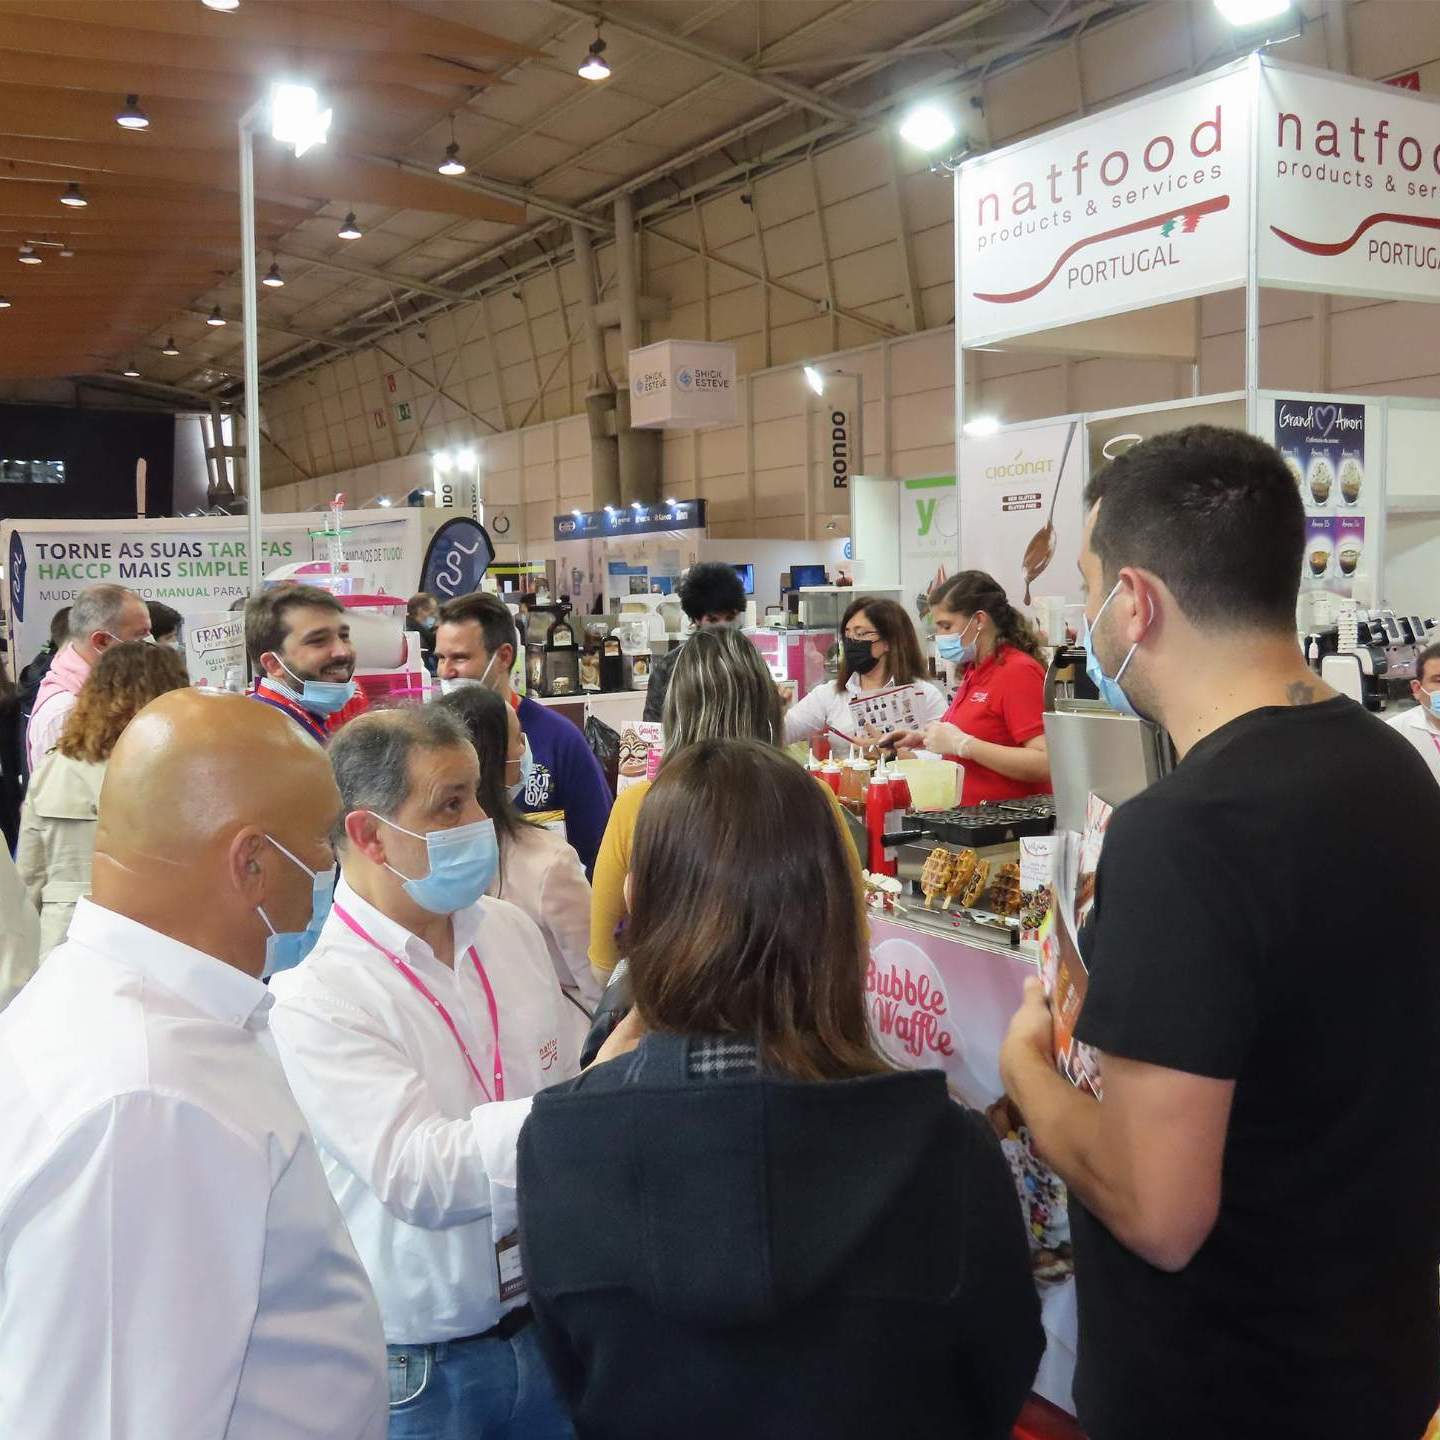 Professionals of the baking and pastry sector marked their presence in the industry's largest fair